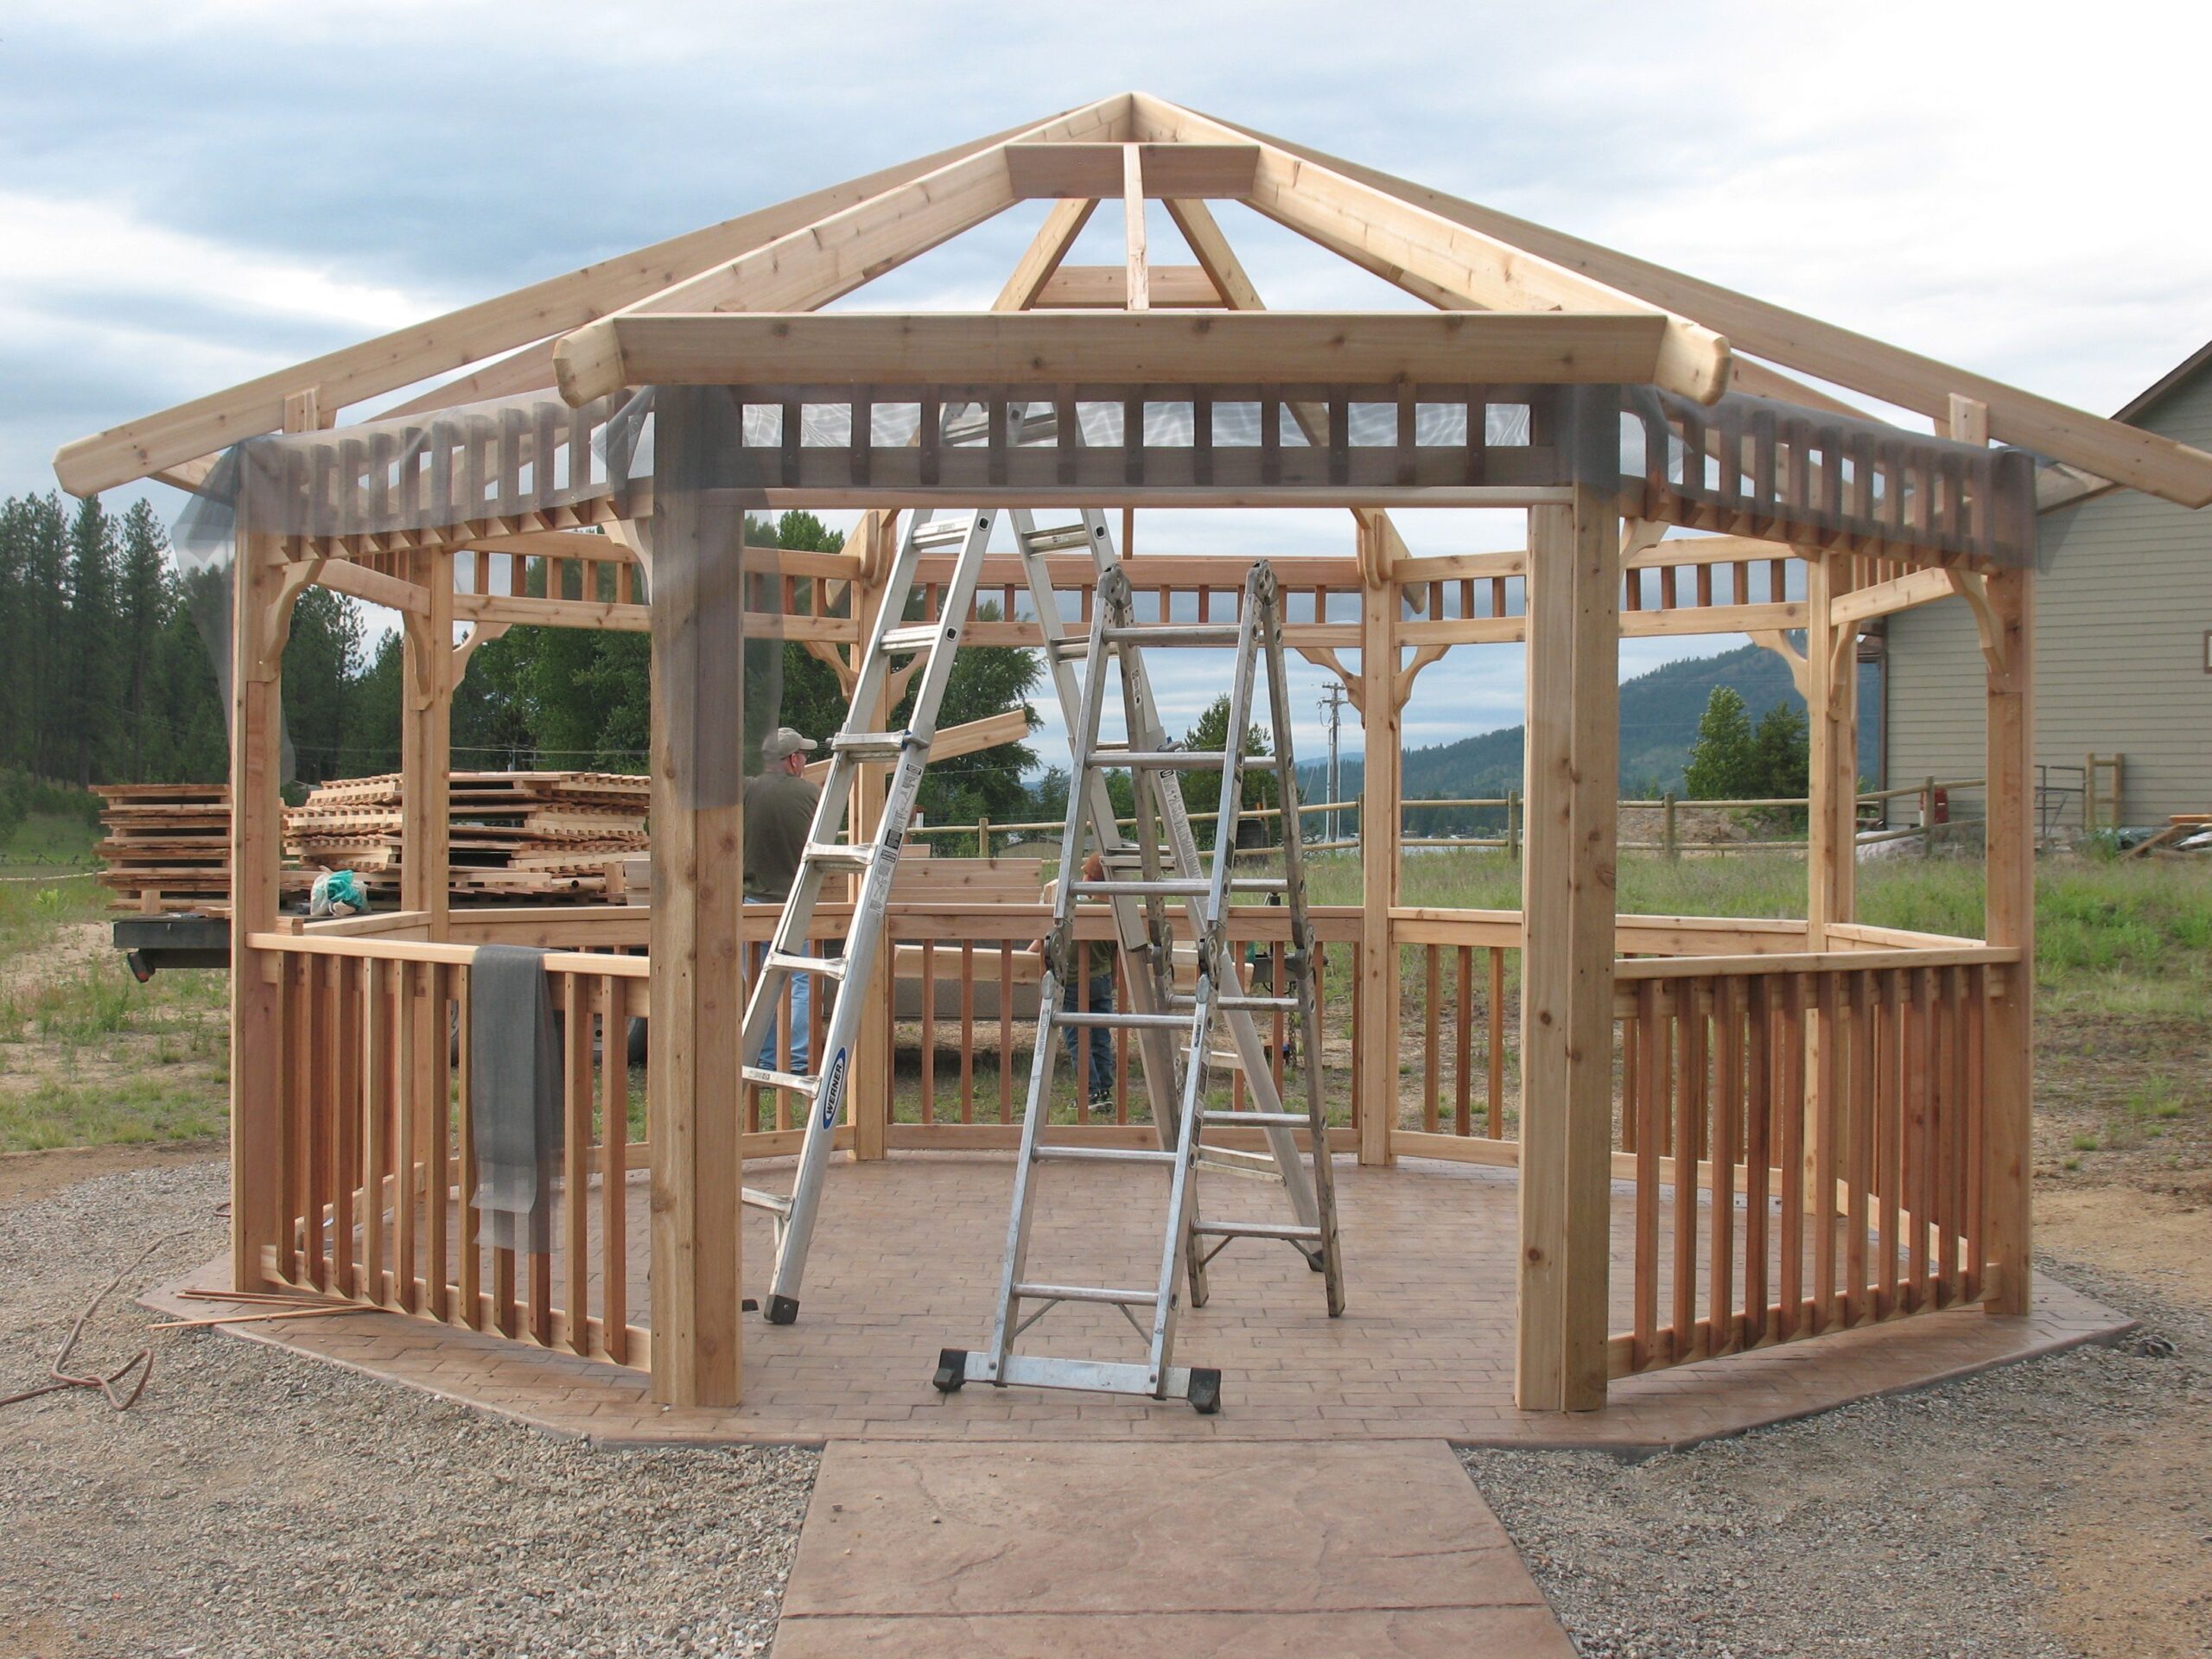 Building Your Own Wooden Gazebo: The Perfect DIY Project for Your Outdoor Space